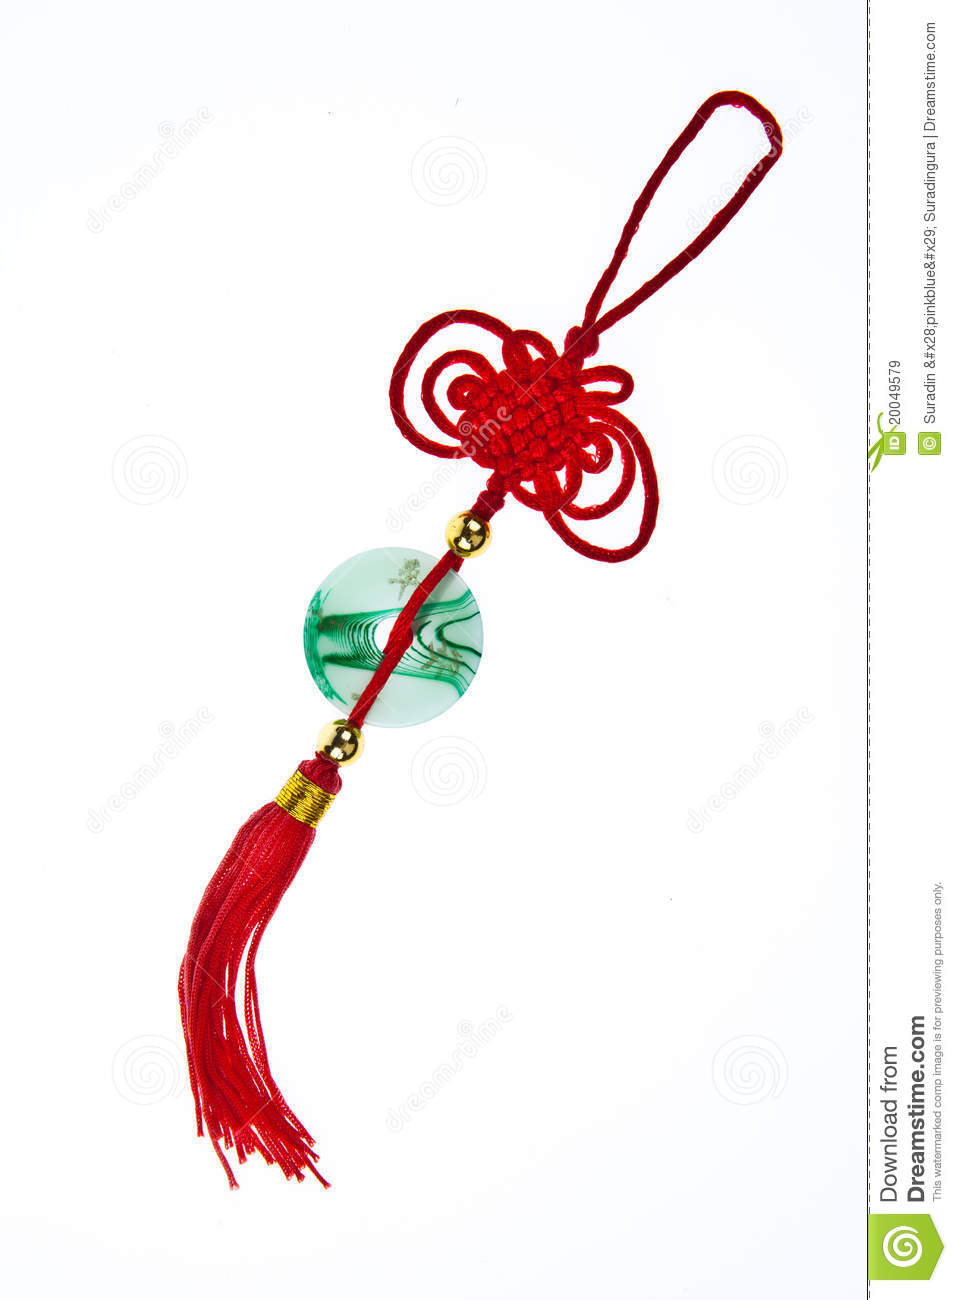 Chinese Traditional Knot With Jade Royalty Free Stock Images   Image